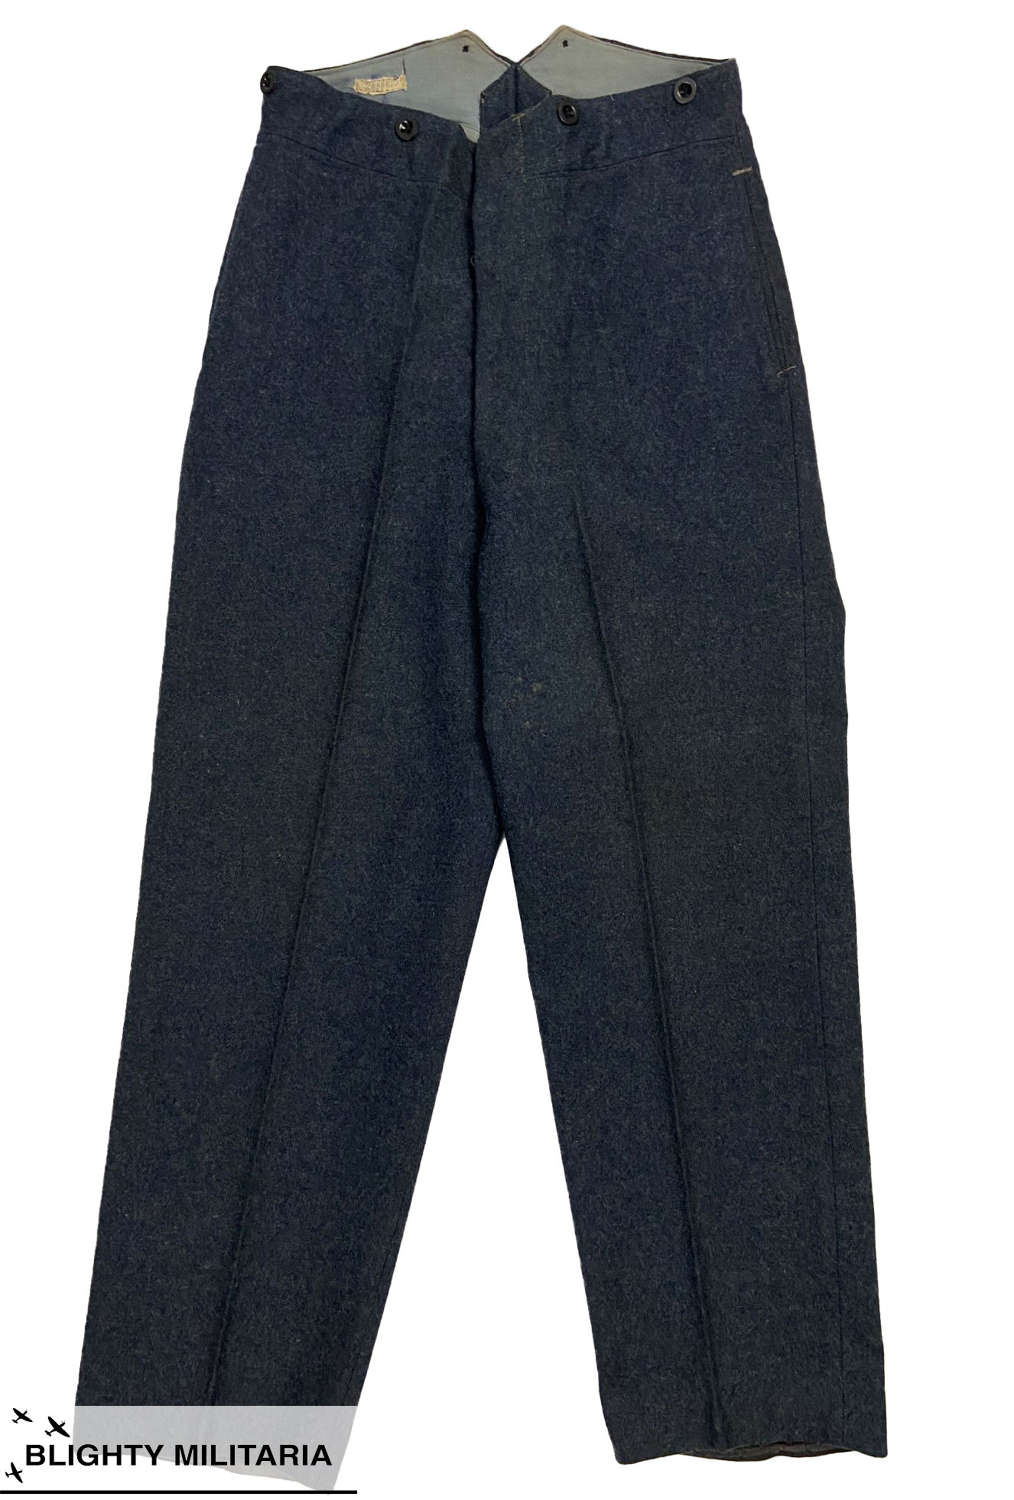 Original 1951 Dated RAF Ordinary Airman's Trousers - Size 17